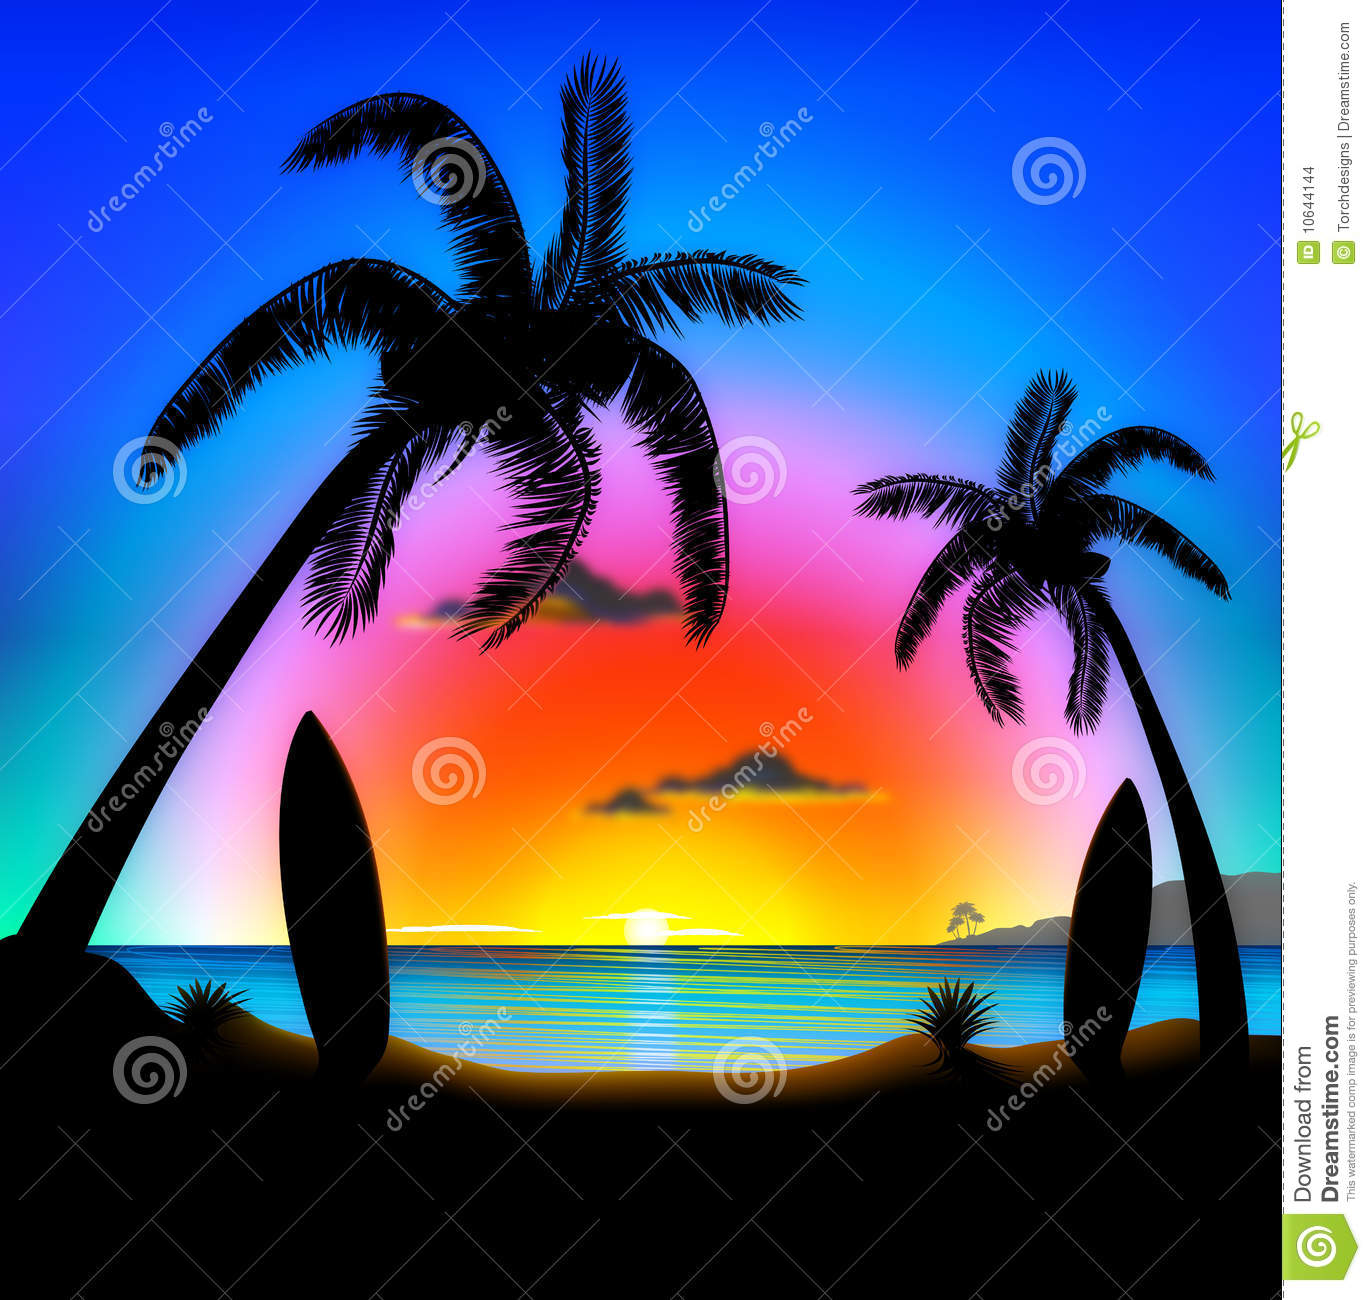 An Illustration Of A Tropical Paradise At Sun Set With A Silhouette Of